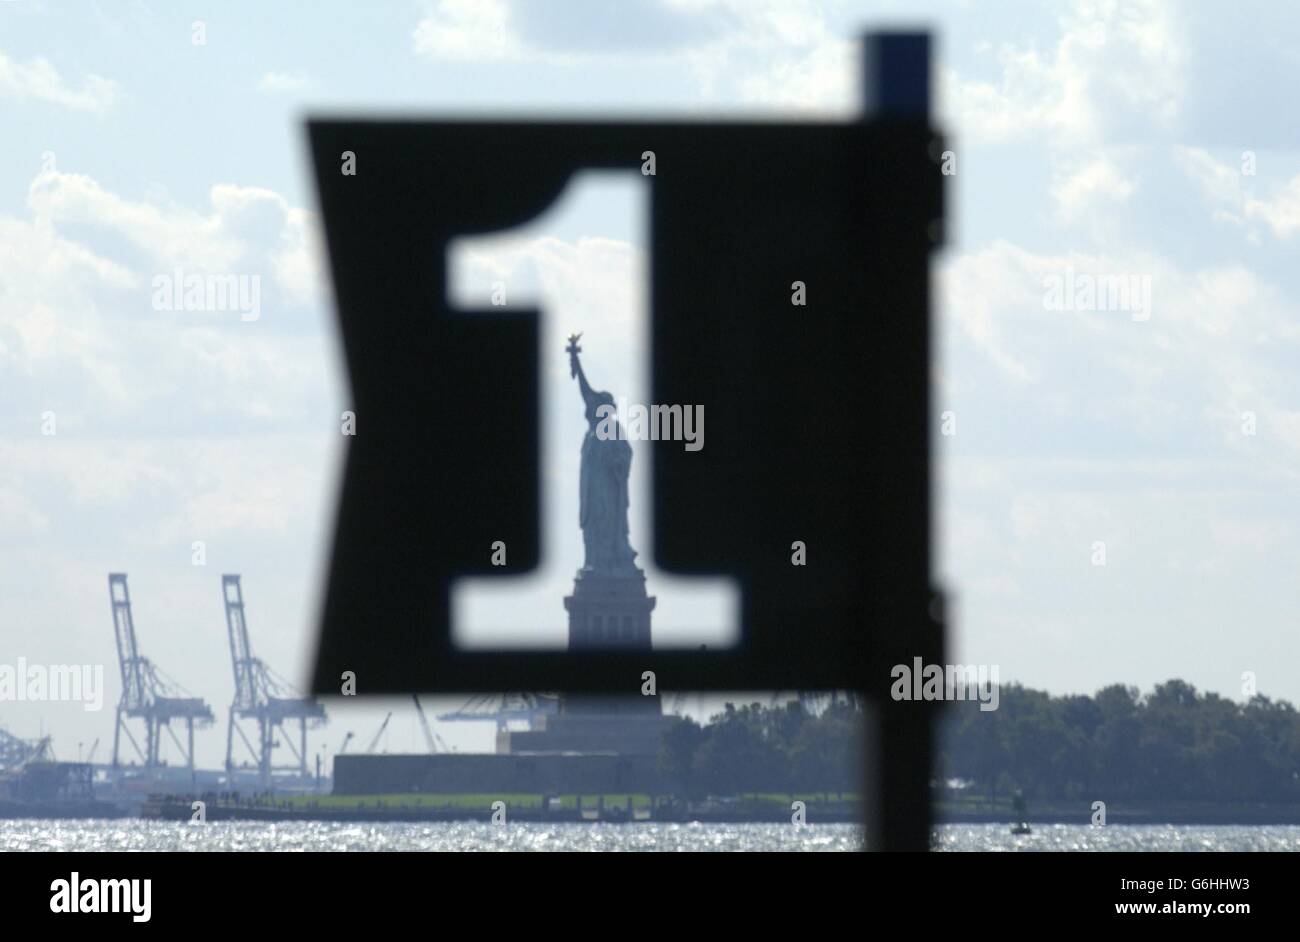 The Statue of Liberty as seen through a Pier marker at the New York docks. The Statue was the first thing that millions of immigrants saw as they sailed into the harbour in the 19th and early 20th centuries, before landing at the notorious Ellis Island to be processed and allowed into the country. Stock Photo